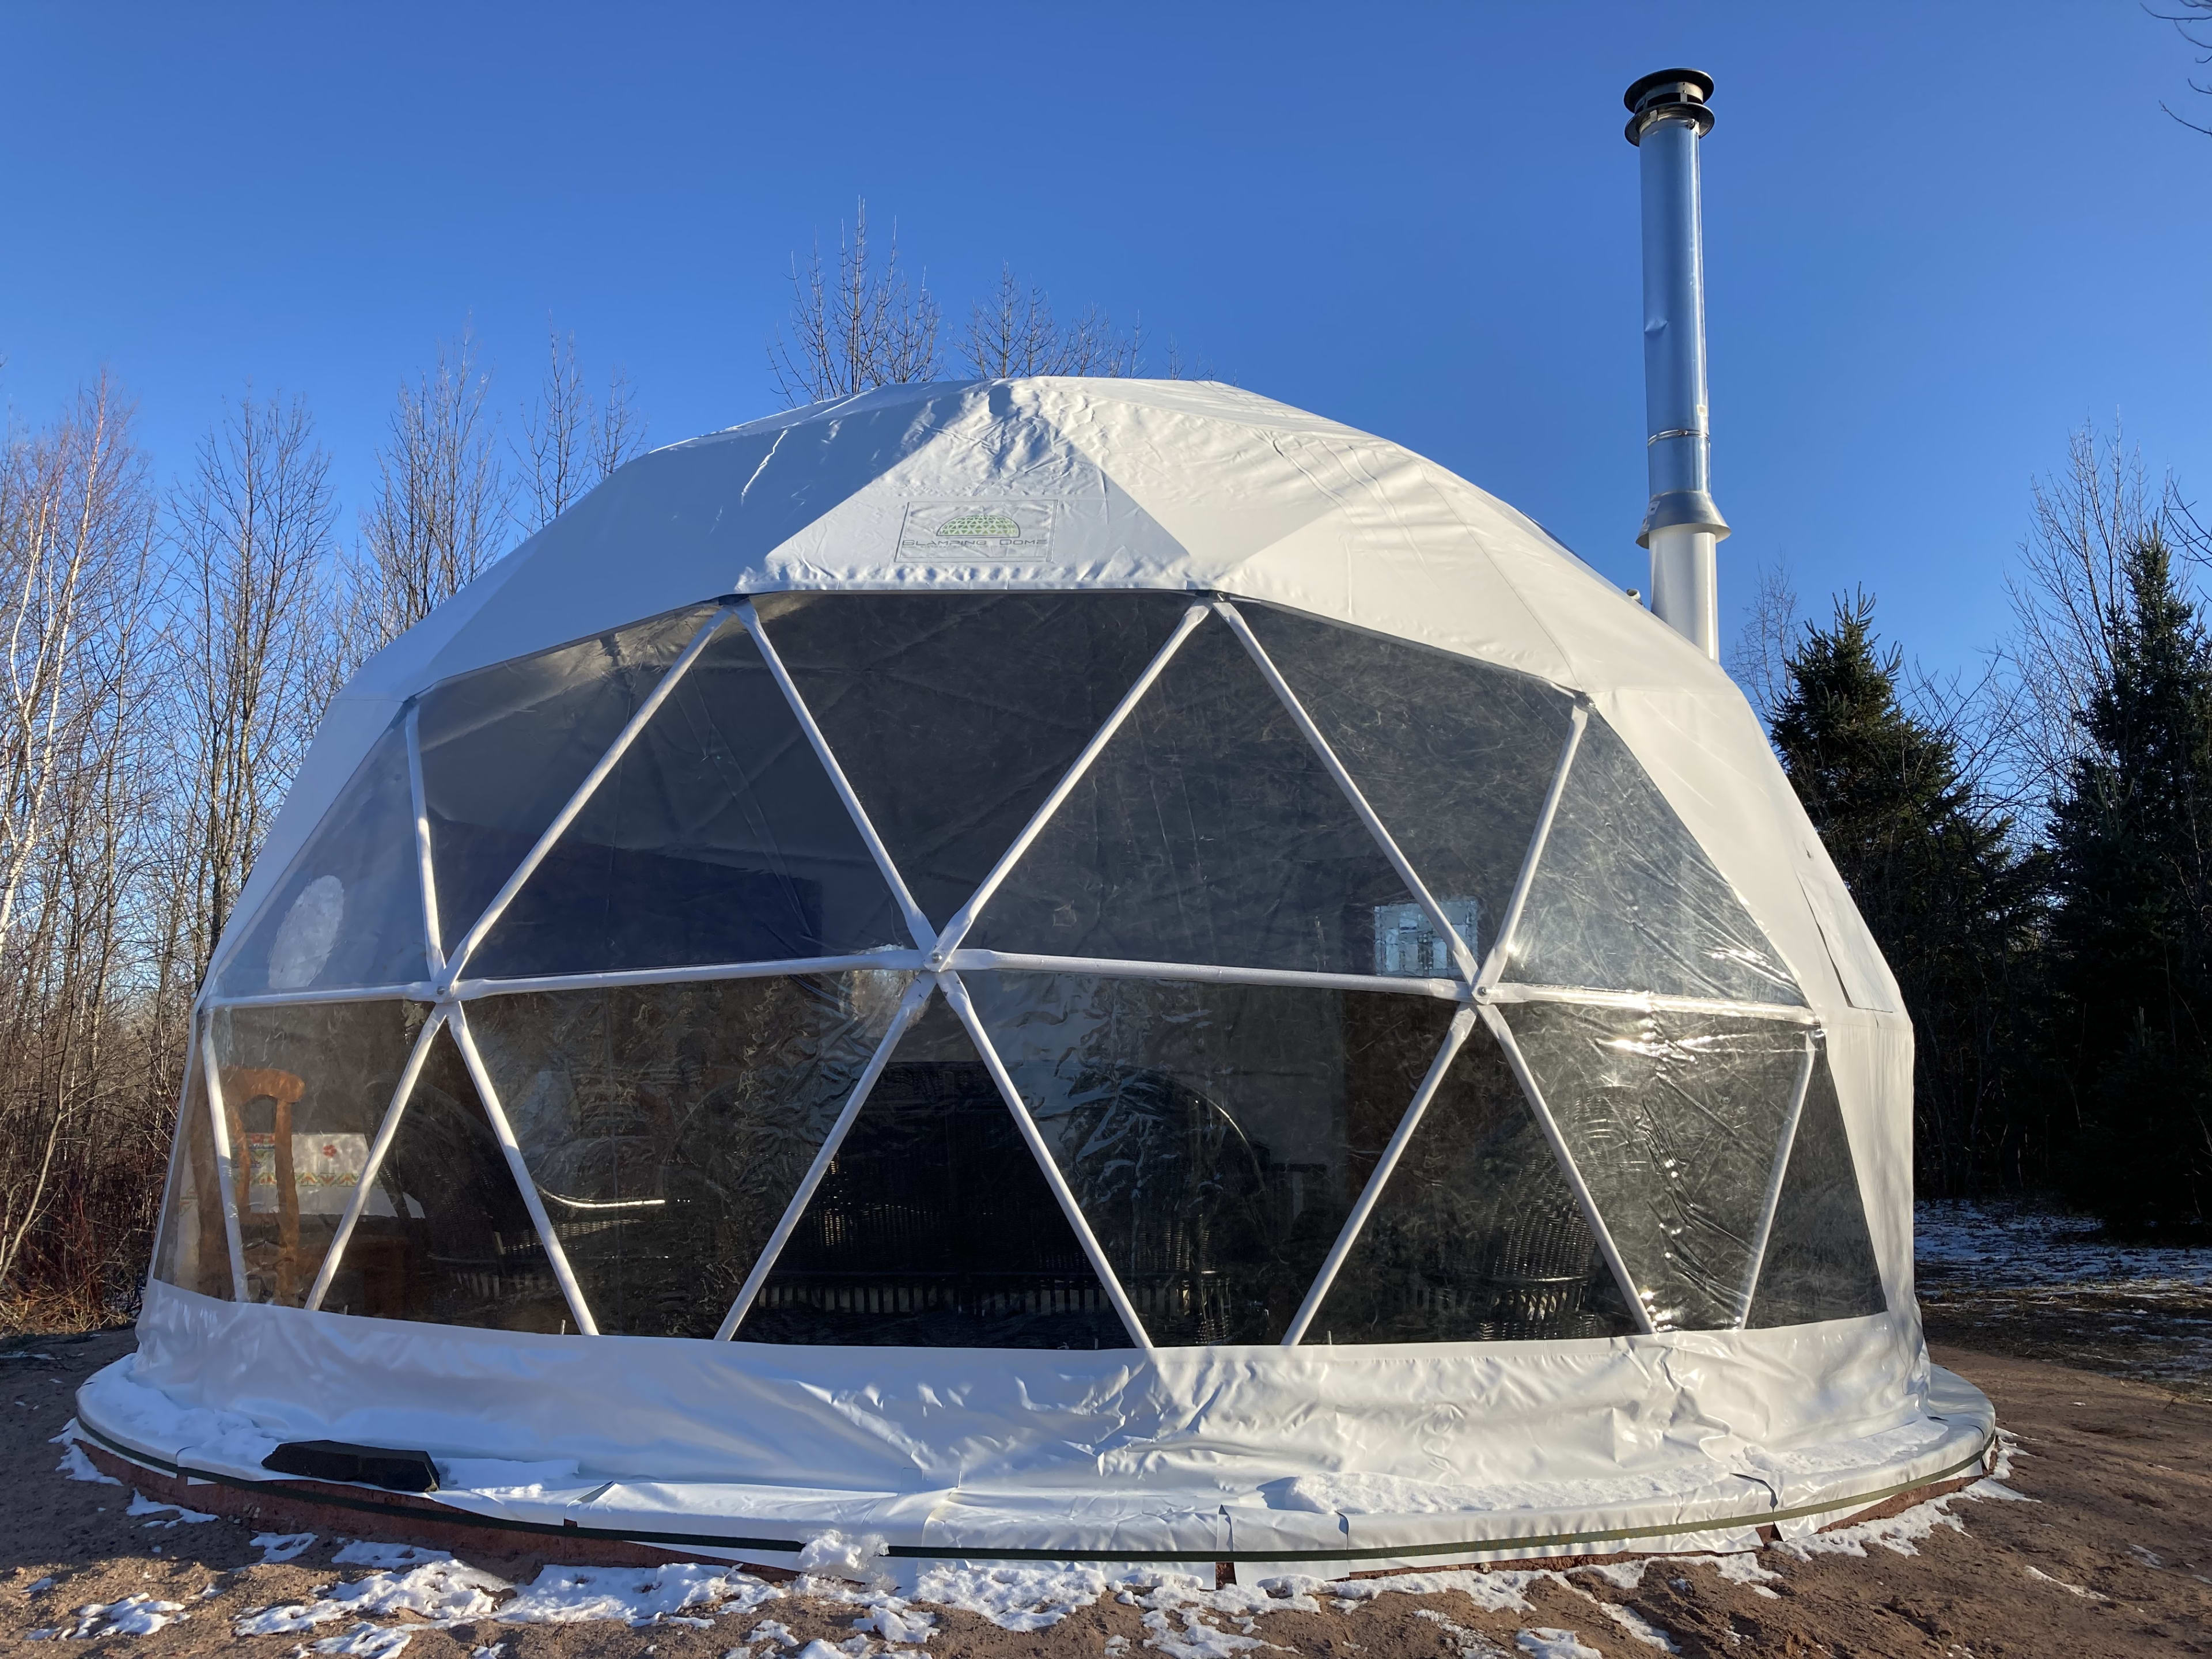 Our new dome awaits you!